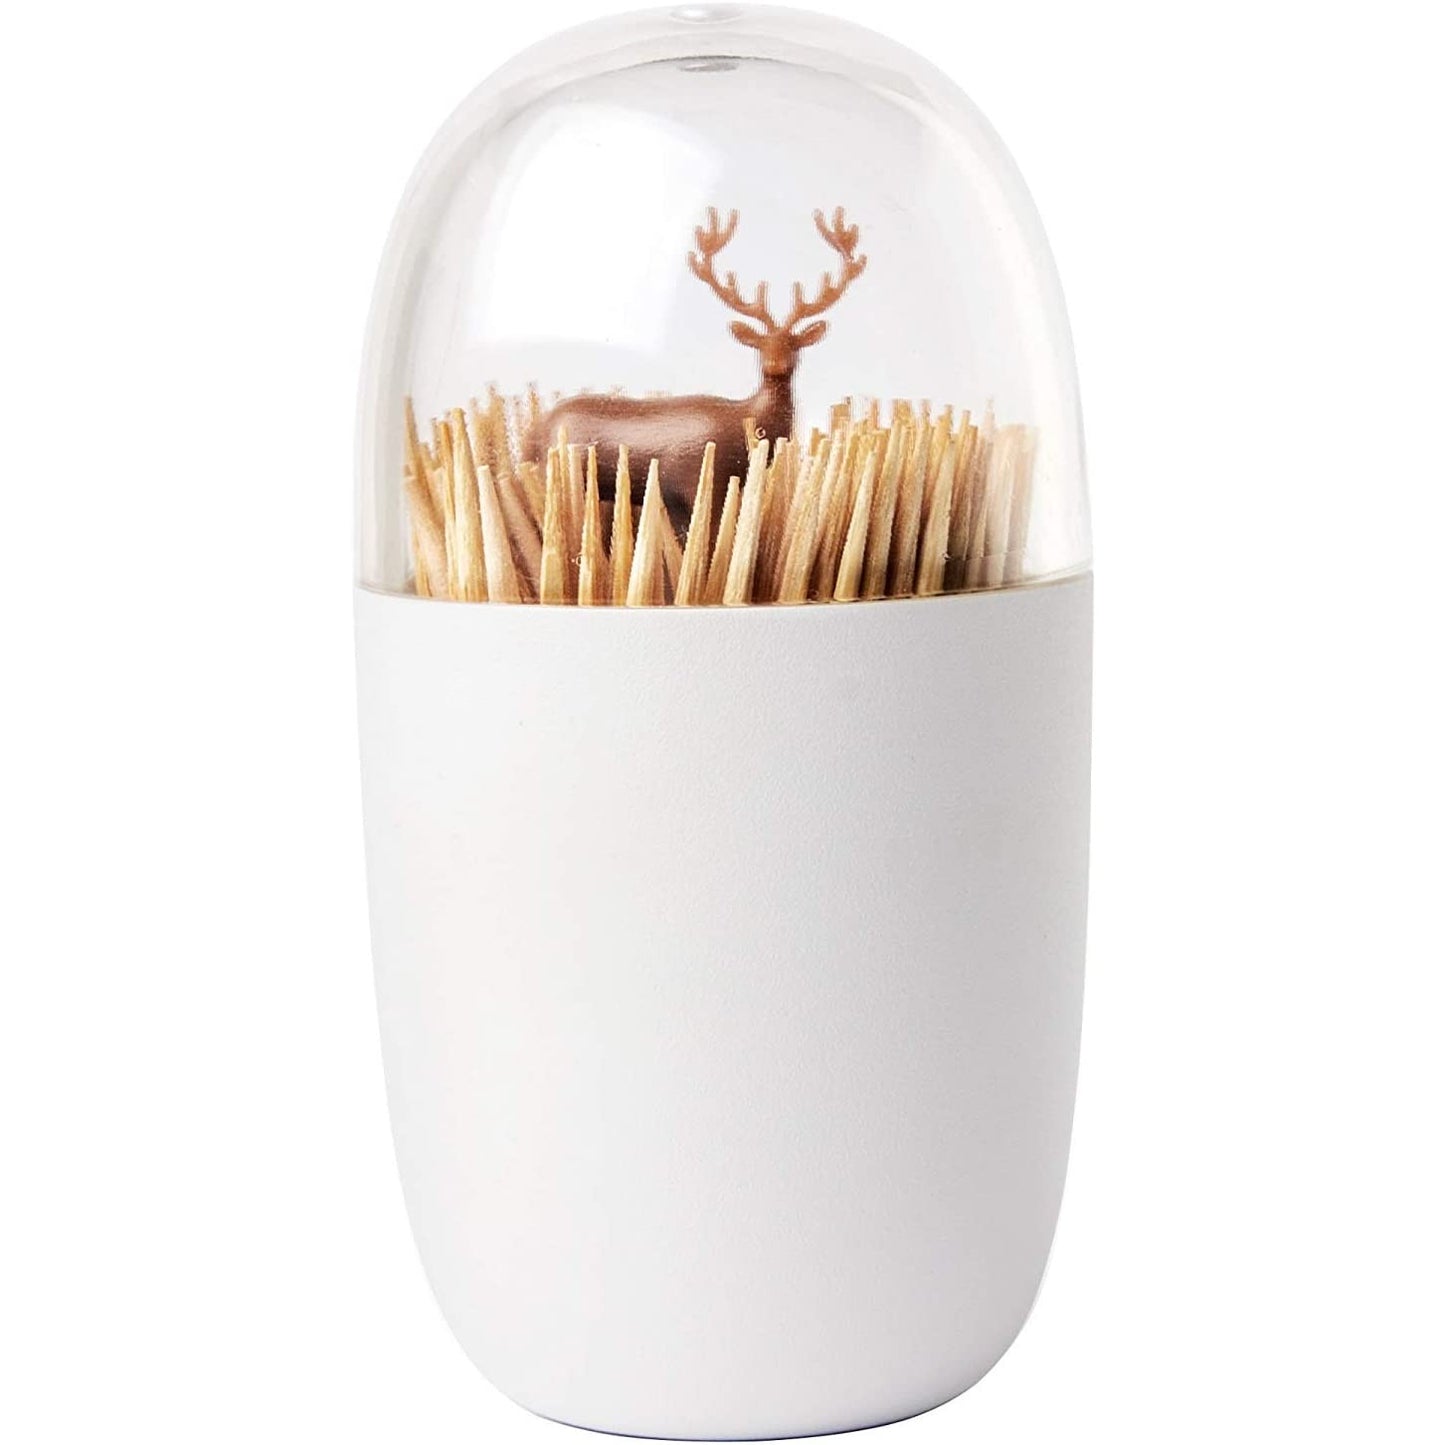 A toothpick holder which looks like a brown deer is hiding in a field of wheat.